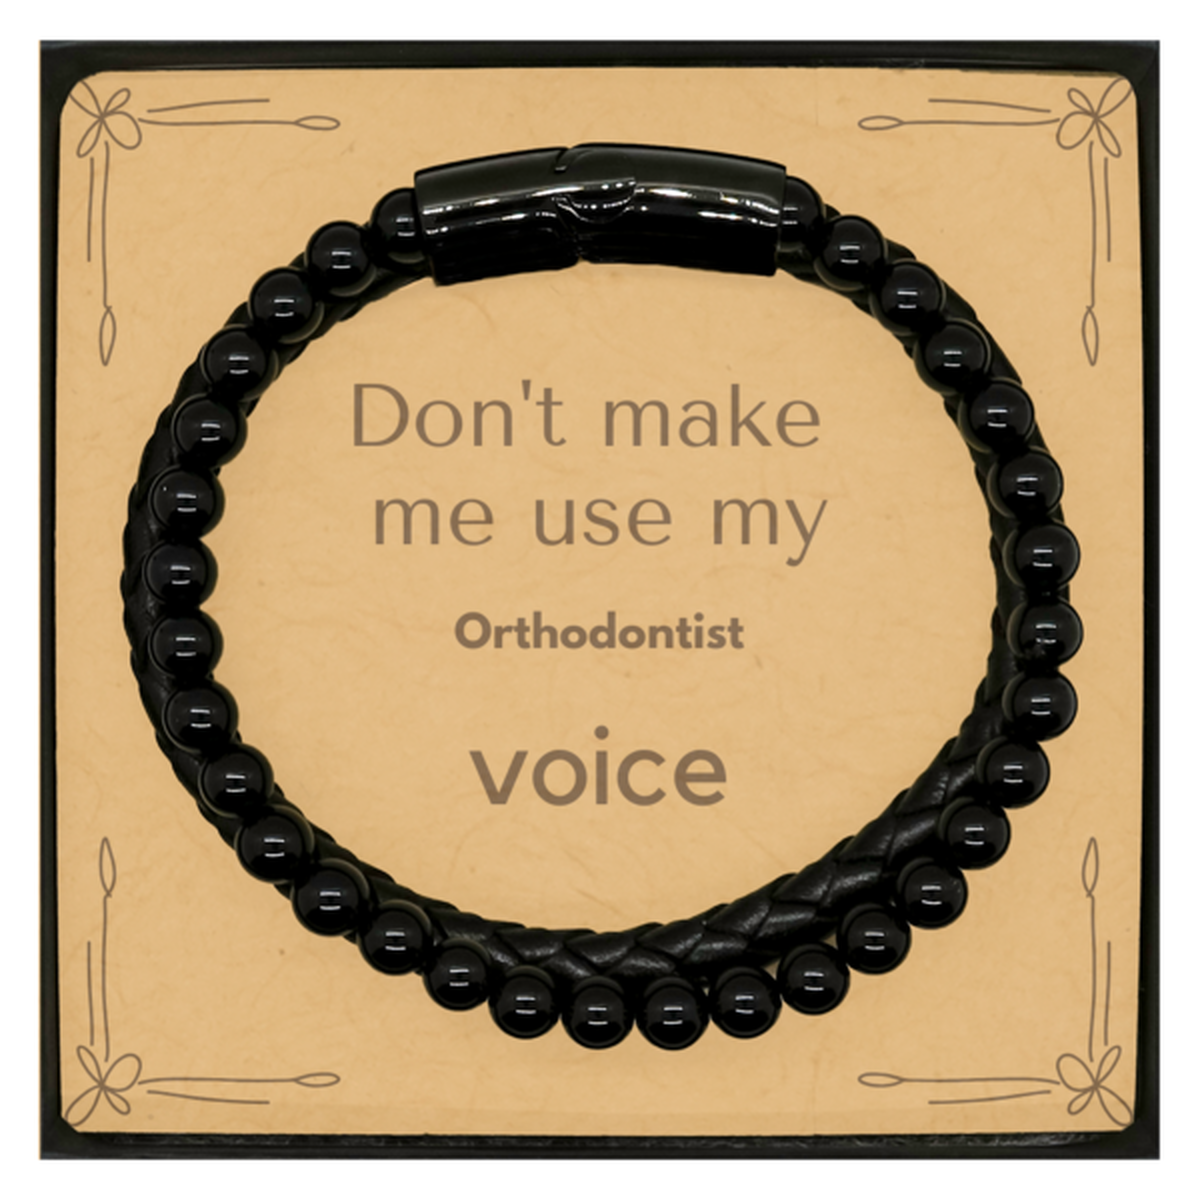 Don't make me use my Orthodontist voice, Sarcasm Orthodontist Card Gifts, Christmas Orthodontist Stone Leather Bracelets Birthday Unique Gifts For Orthodontist Coworkers, Men, Women, Colleague, Friends